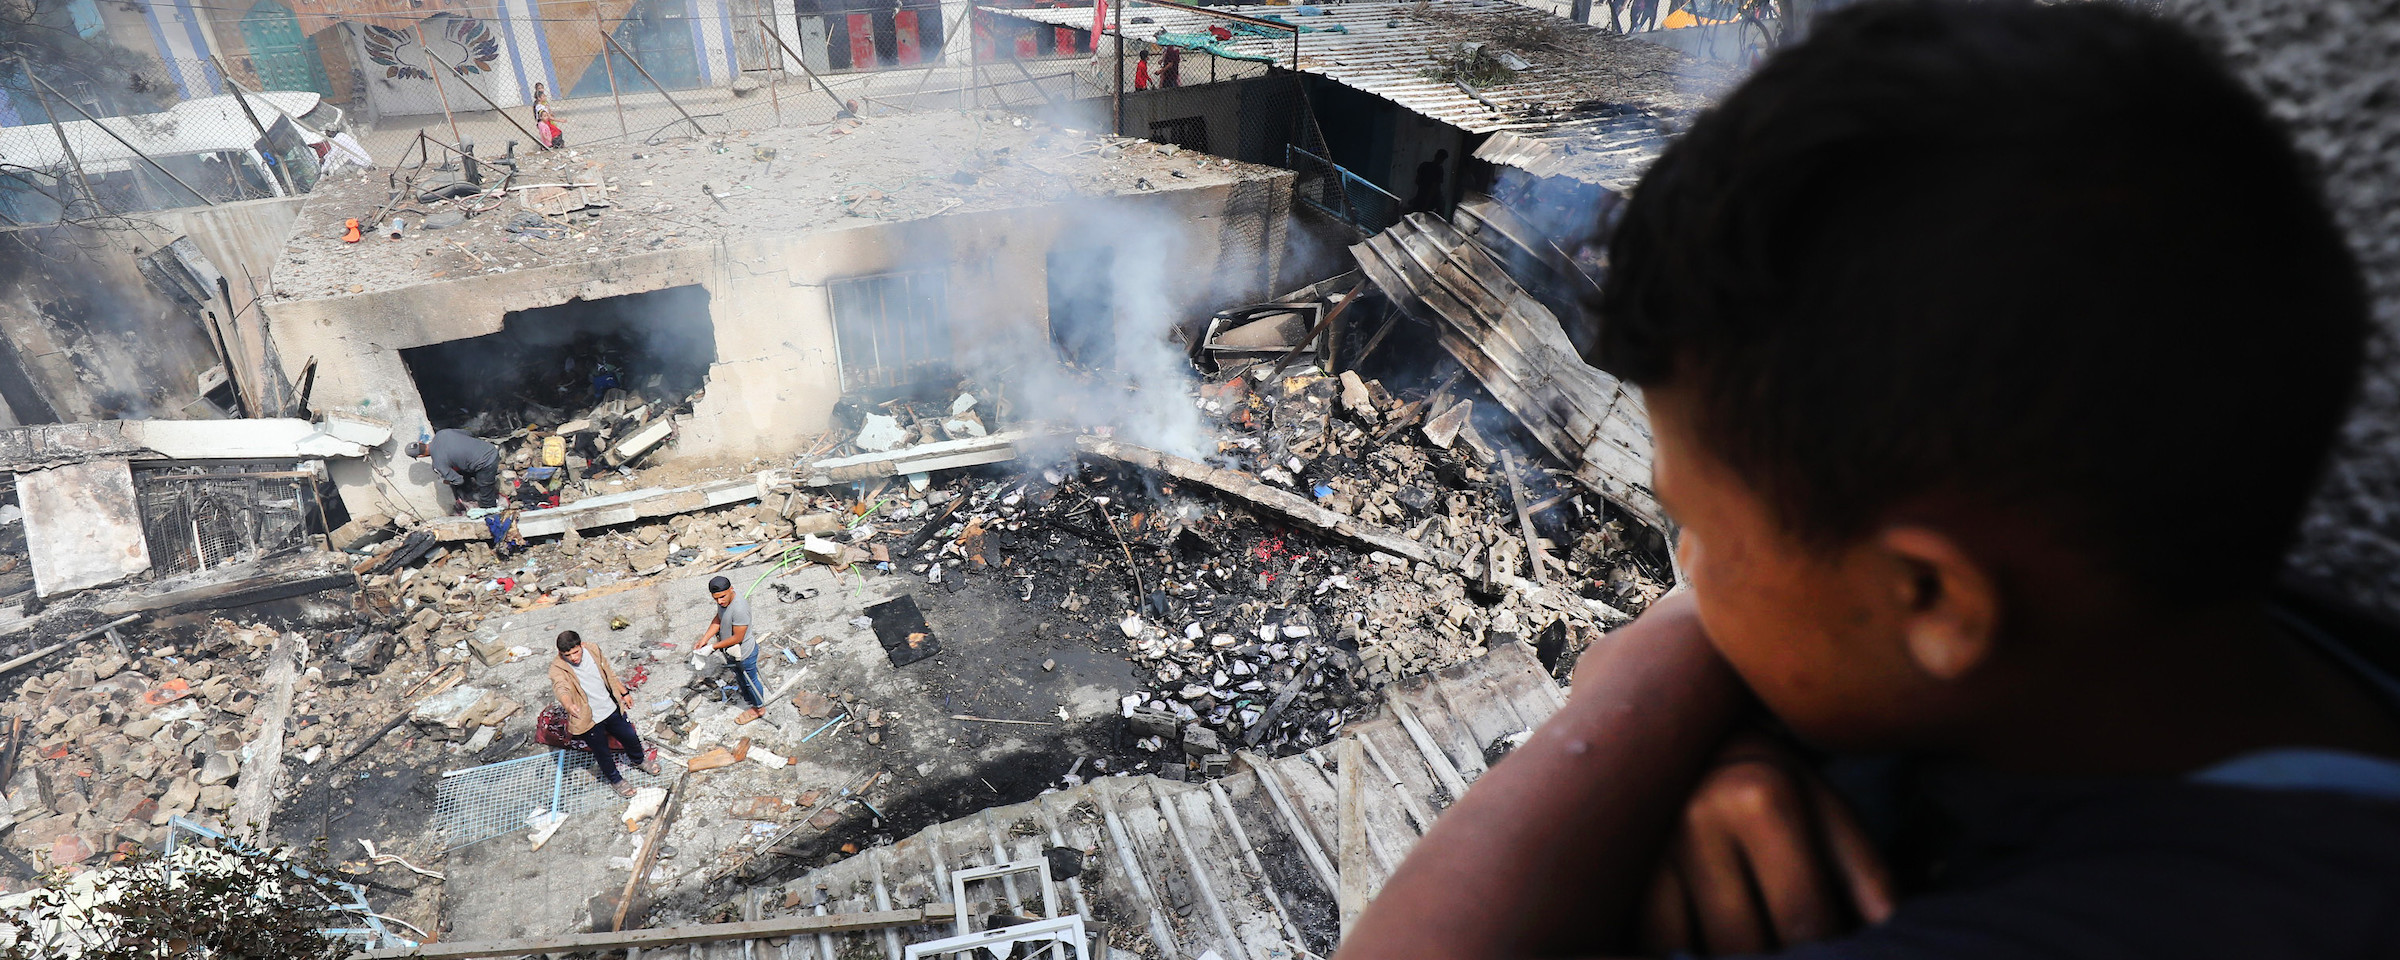 A boy leans over a railing while looking down at smoking debris where a building once stood